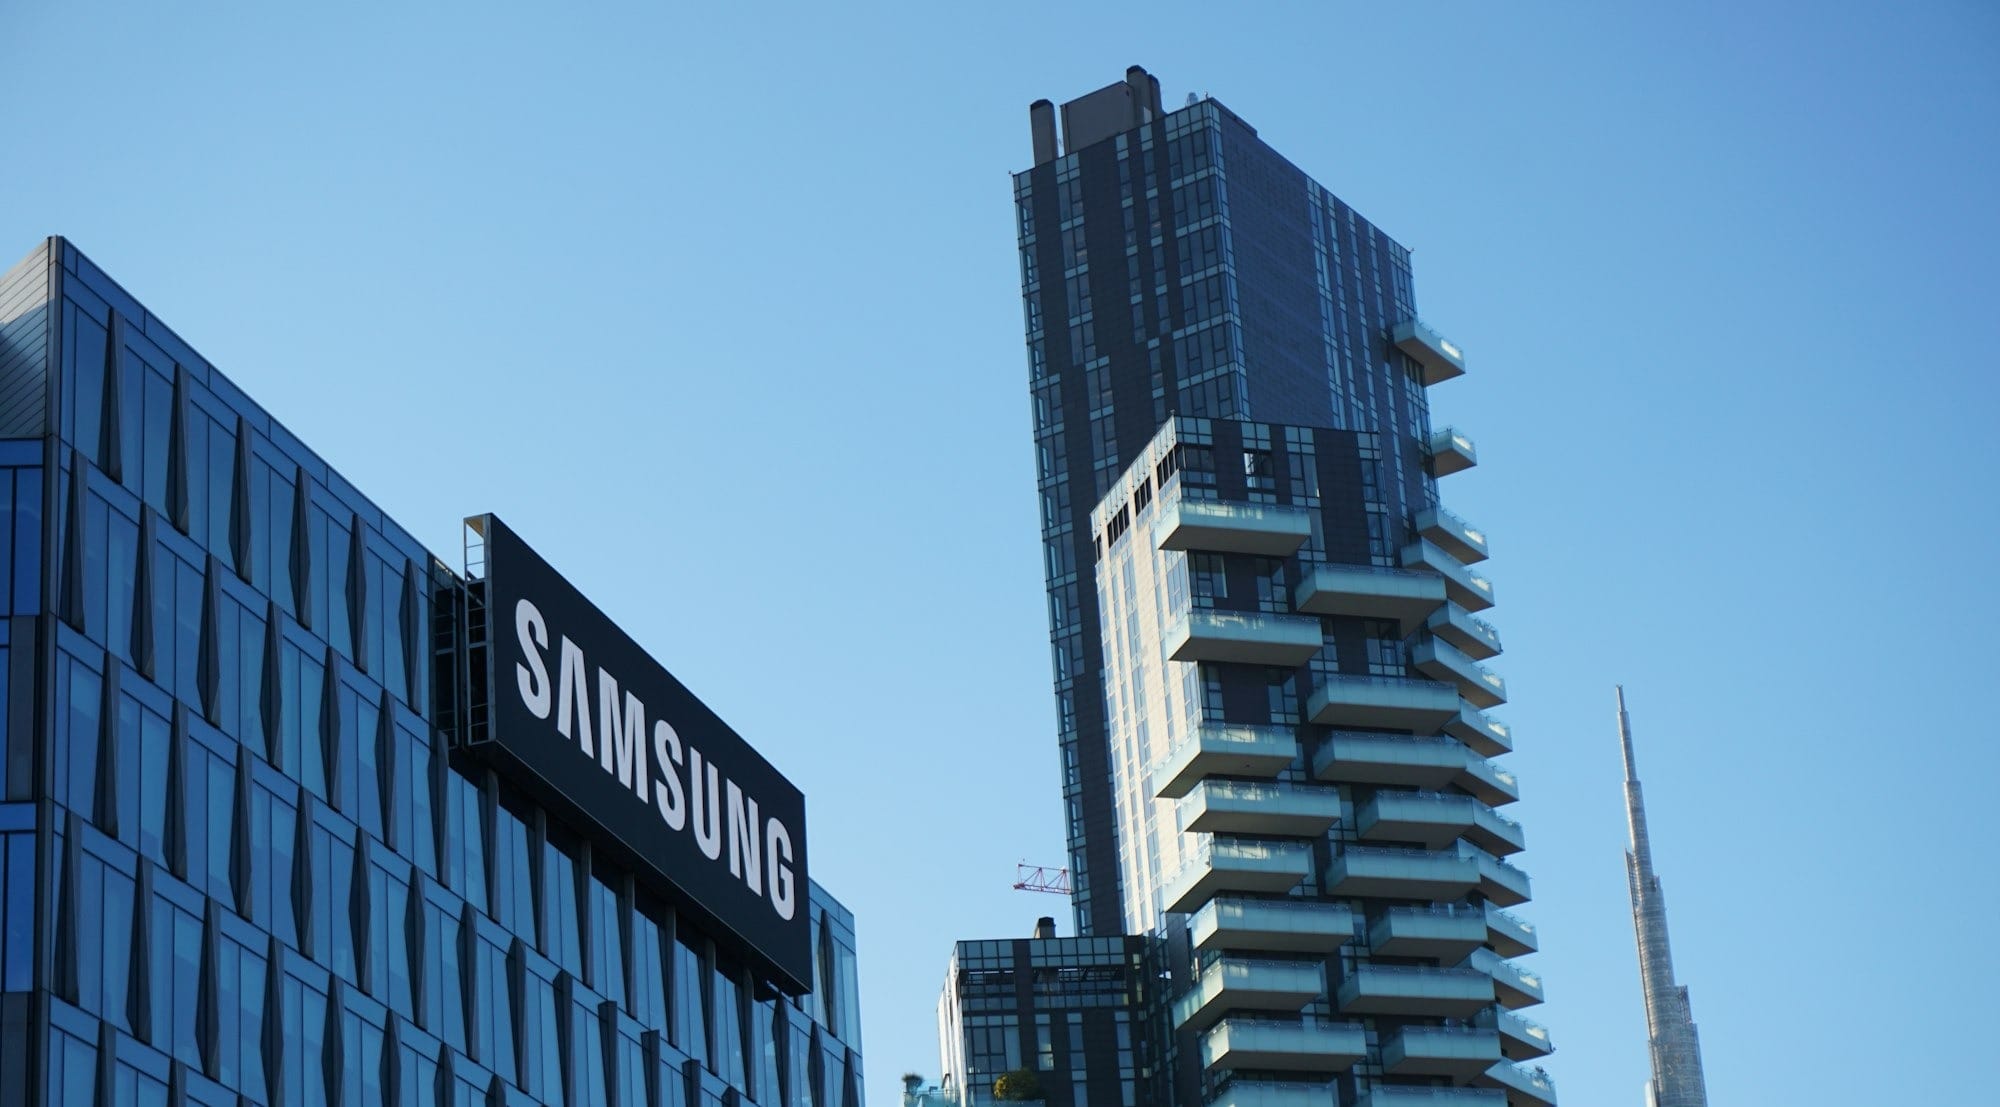 Samsung expects to make over $100 million from the sale of advanced chips